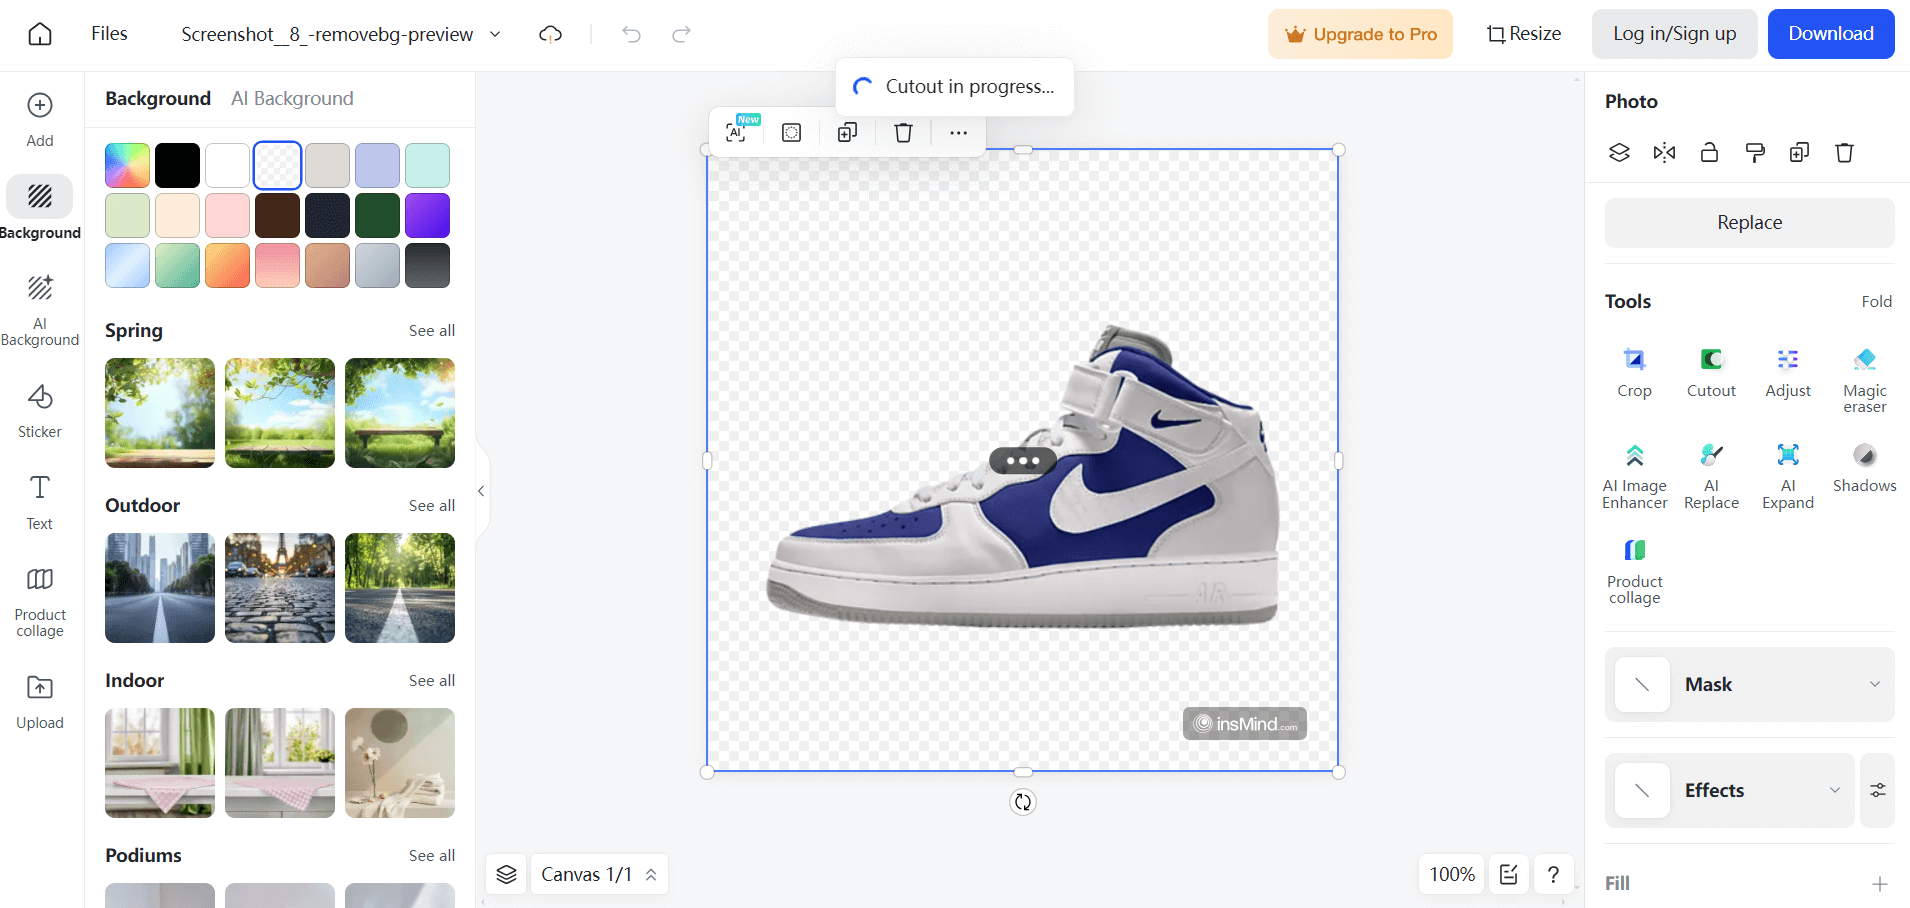 Sneakers displayed with a transparent background after using an advanced editing tool.